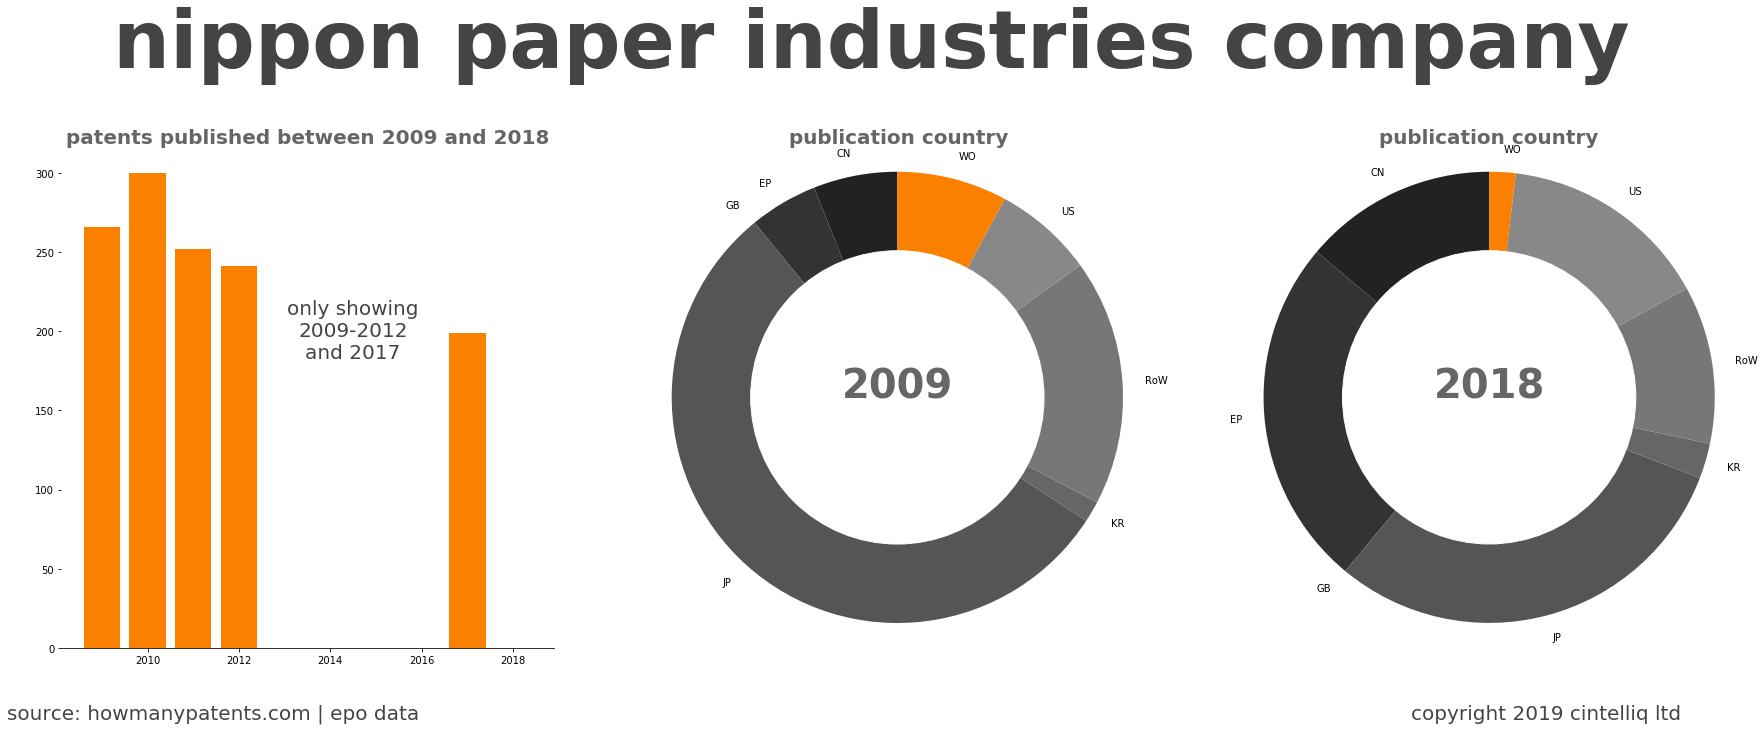 summary of patents for Nippon Paper Industries Company